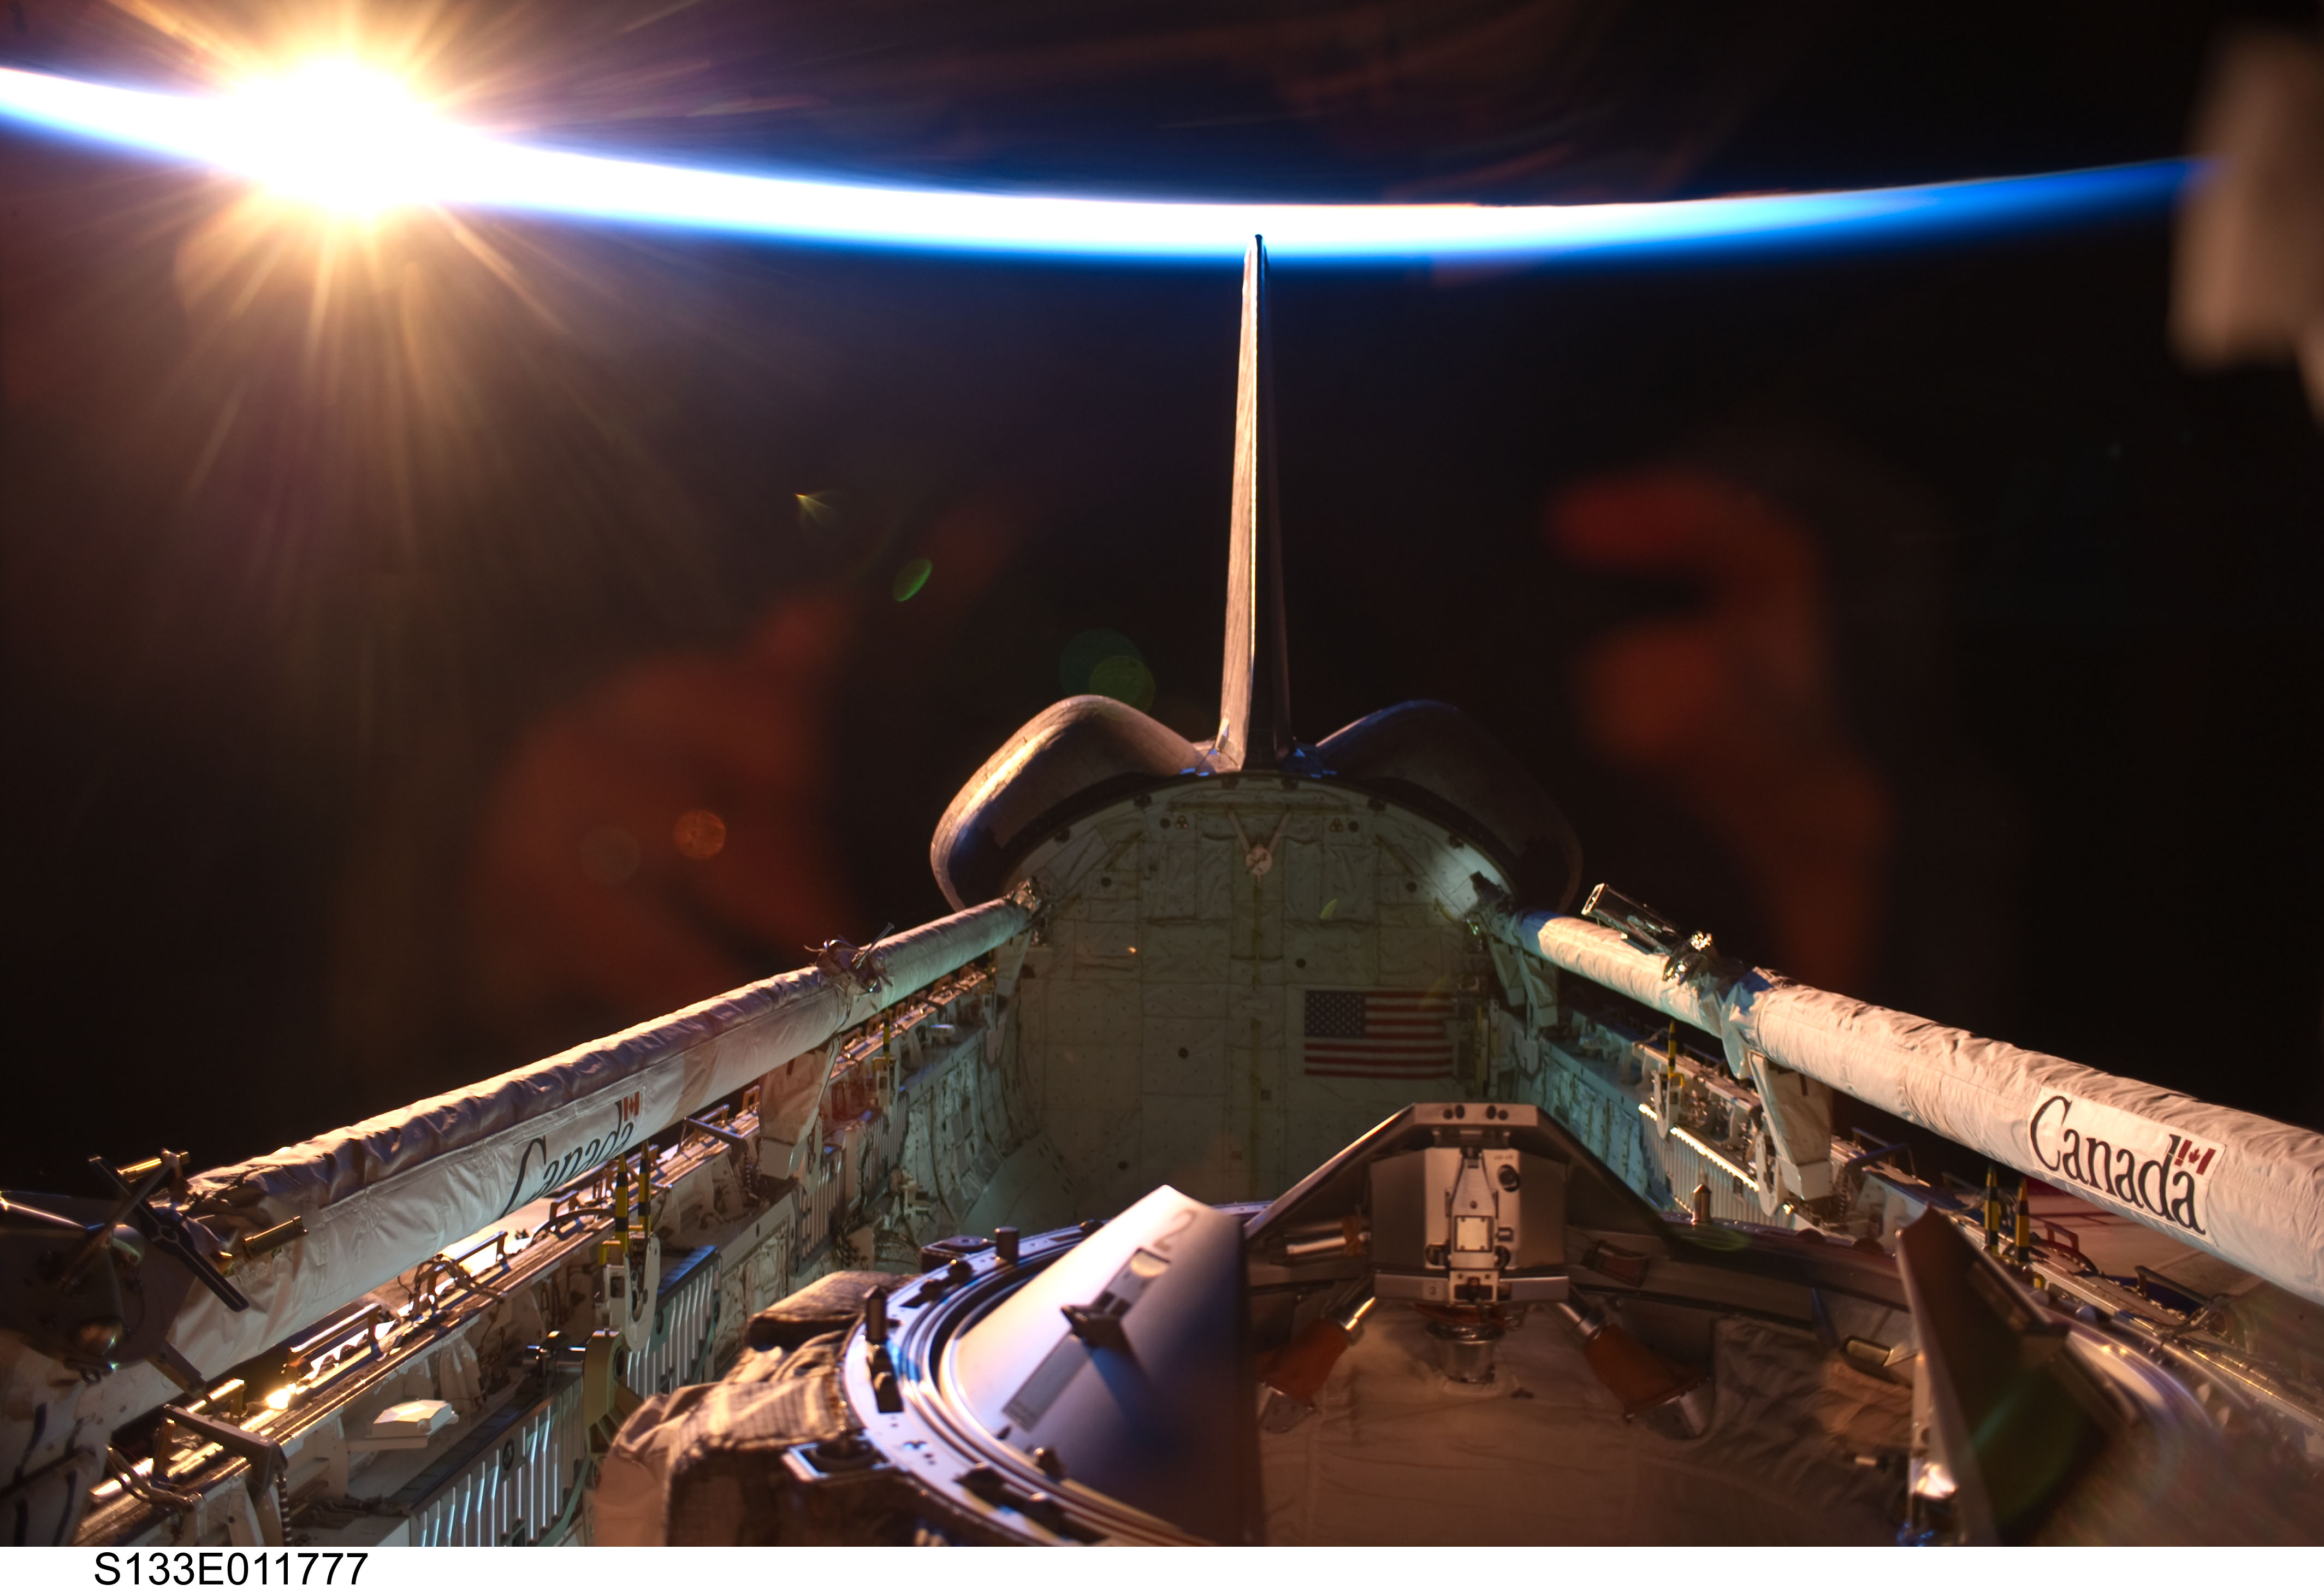 Discovery's empty payload bay, on the orbiter's second-to-last day in space, in March 2011. Eric Boe would reflect on Discovery as the "workhorse" of the shuttle fleet. Photo Credit: NASA